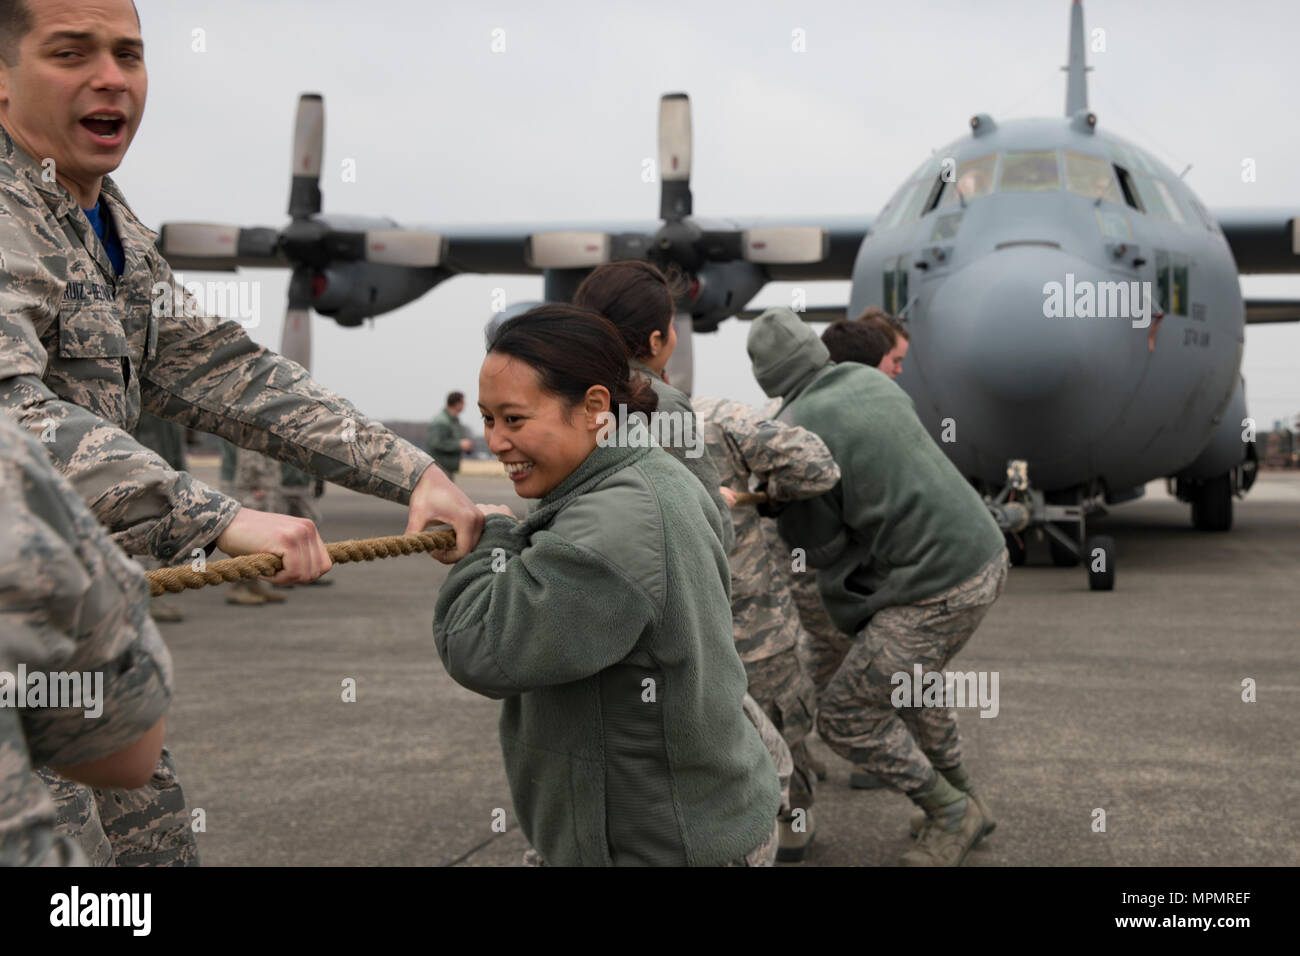 Airmen with the 374th Maintenance Squadron pull a C-130H Hercules at Yokota Air Base, Japan, March 31, 2017. Four teams from 374th Aircraft Maintenance Squadron, 374th MXS, 374th MXG, and 730th Air Mobility Squadron pulled a C-130H to win points toward a Sprit Award, an internal award given to the 'best' squadron. (U.S. Air Force photo by Yasuo Osakabe) Stock Photo